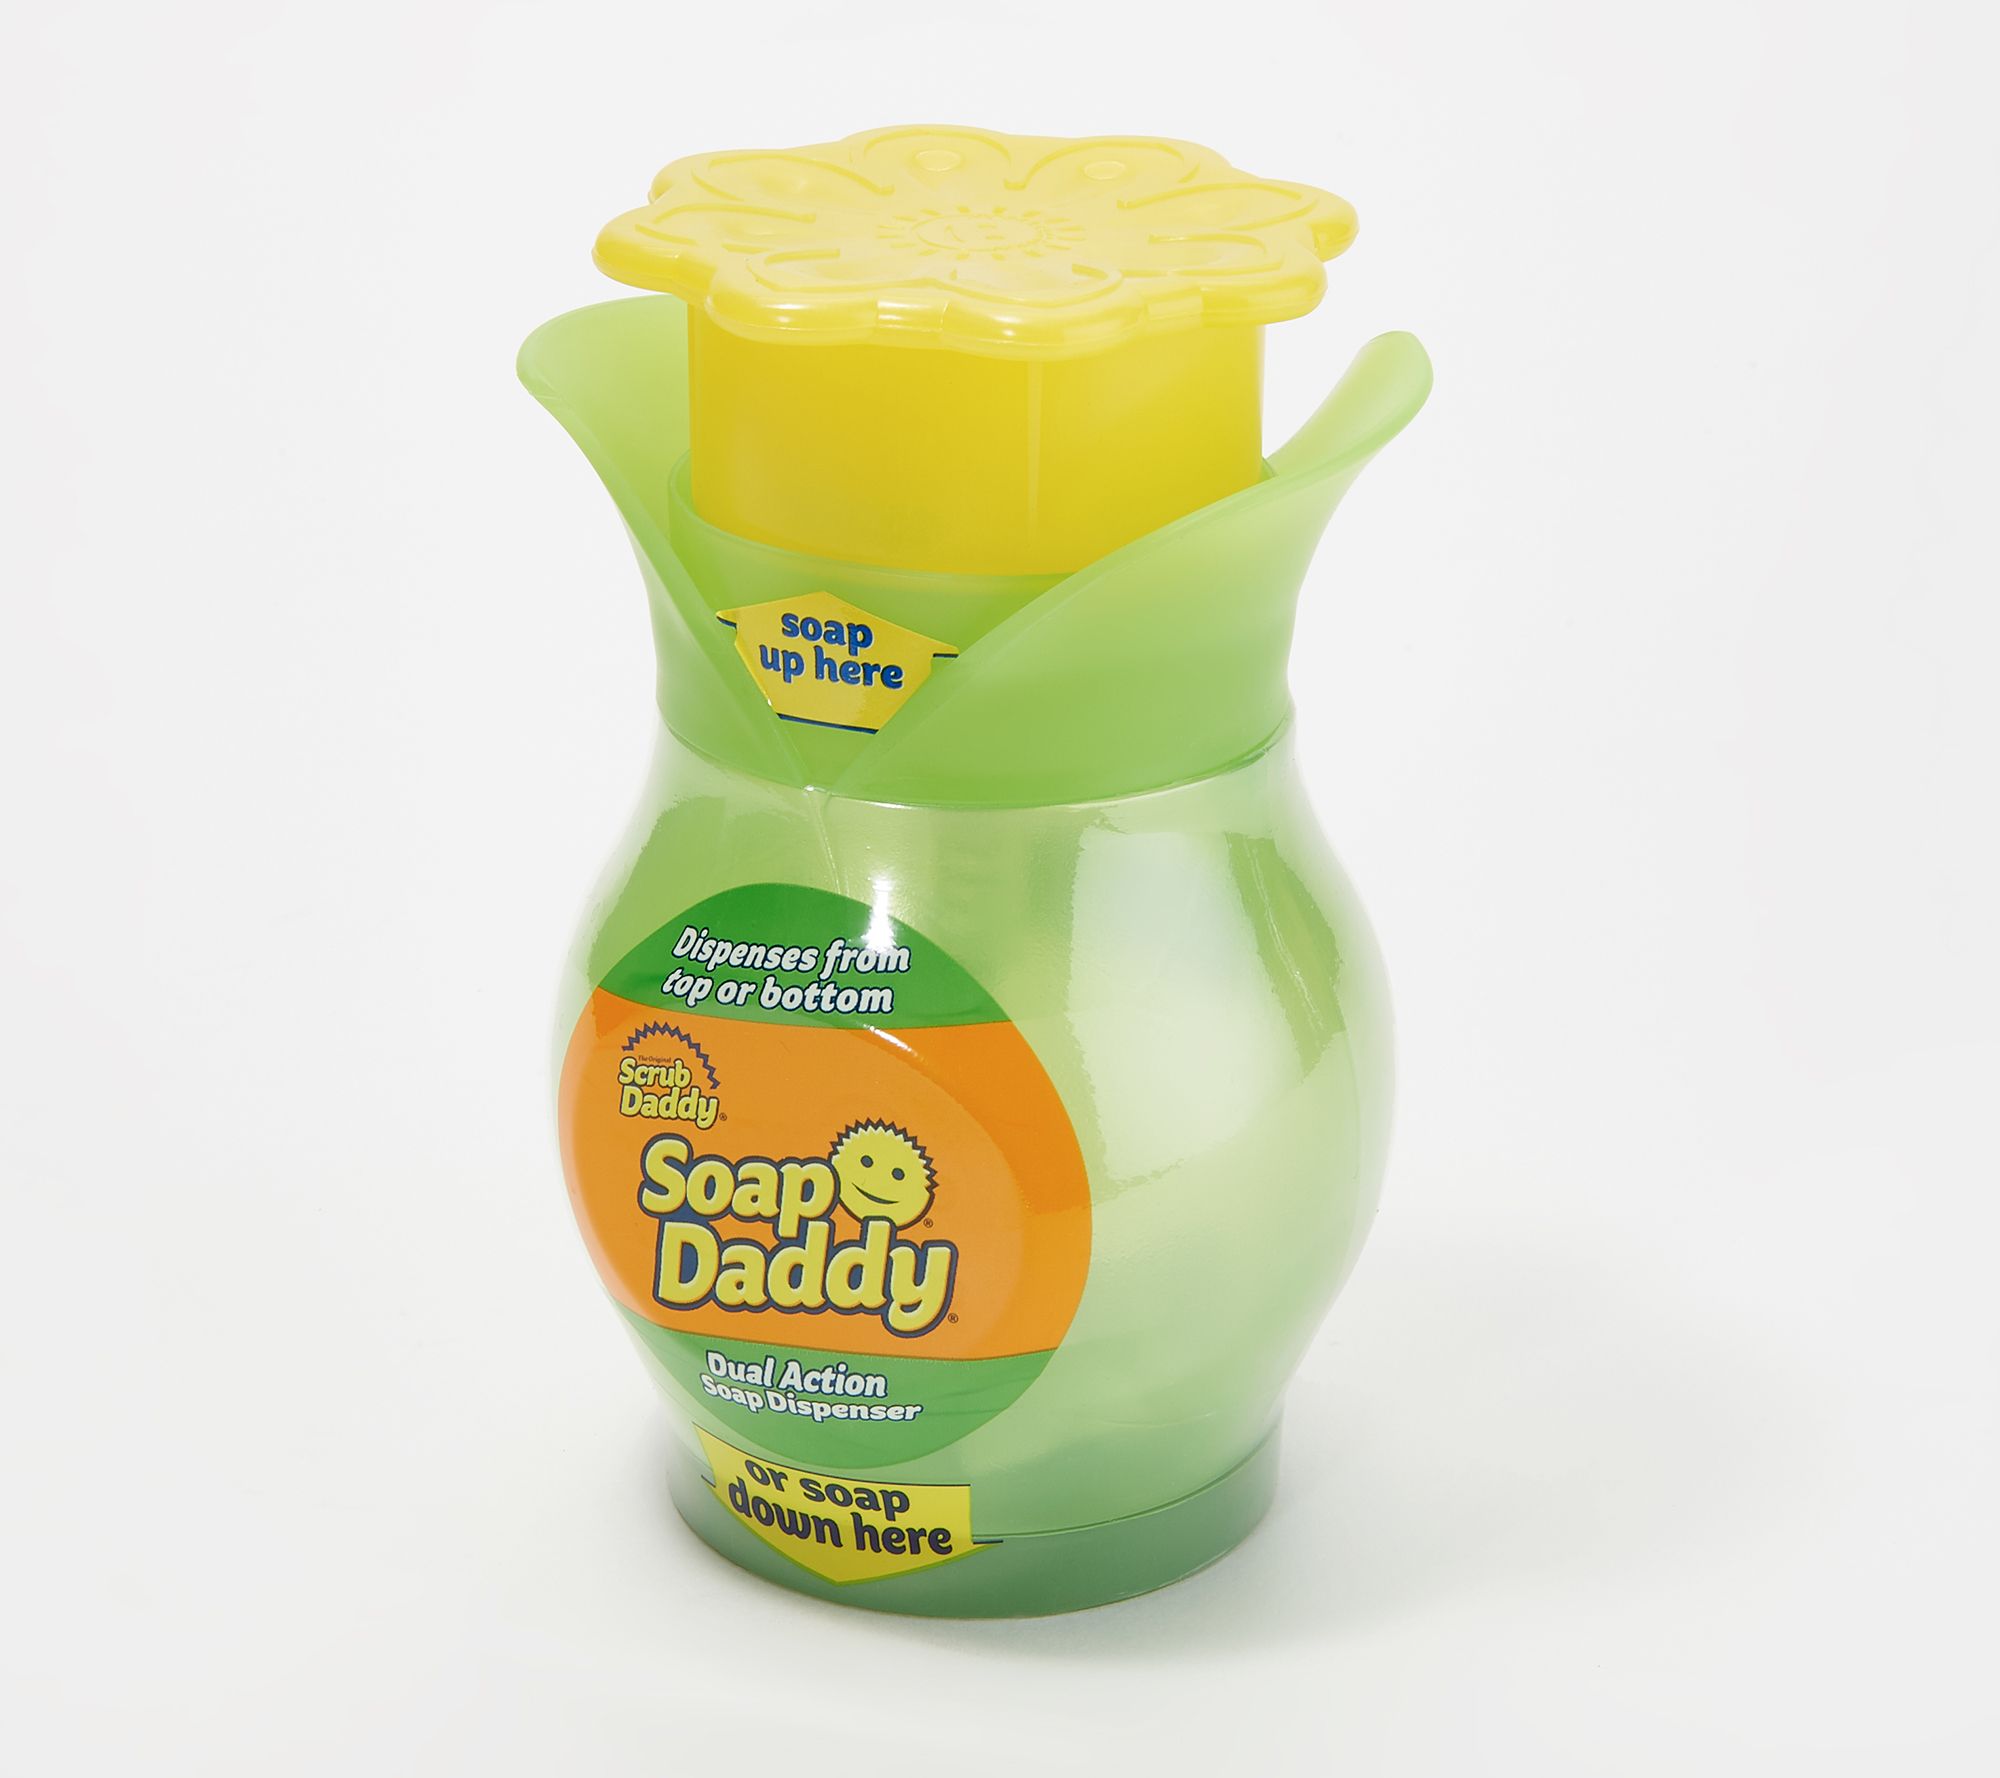 Scrub Daddy Soap Dispenser - Soap Daddy, Dual Action Bottle for